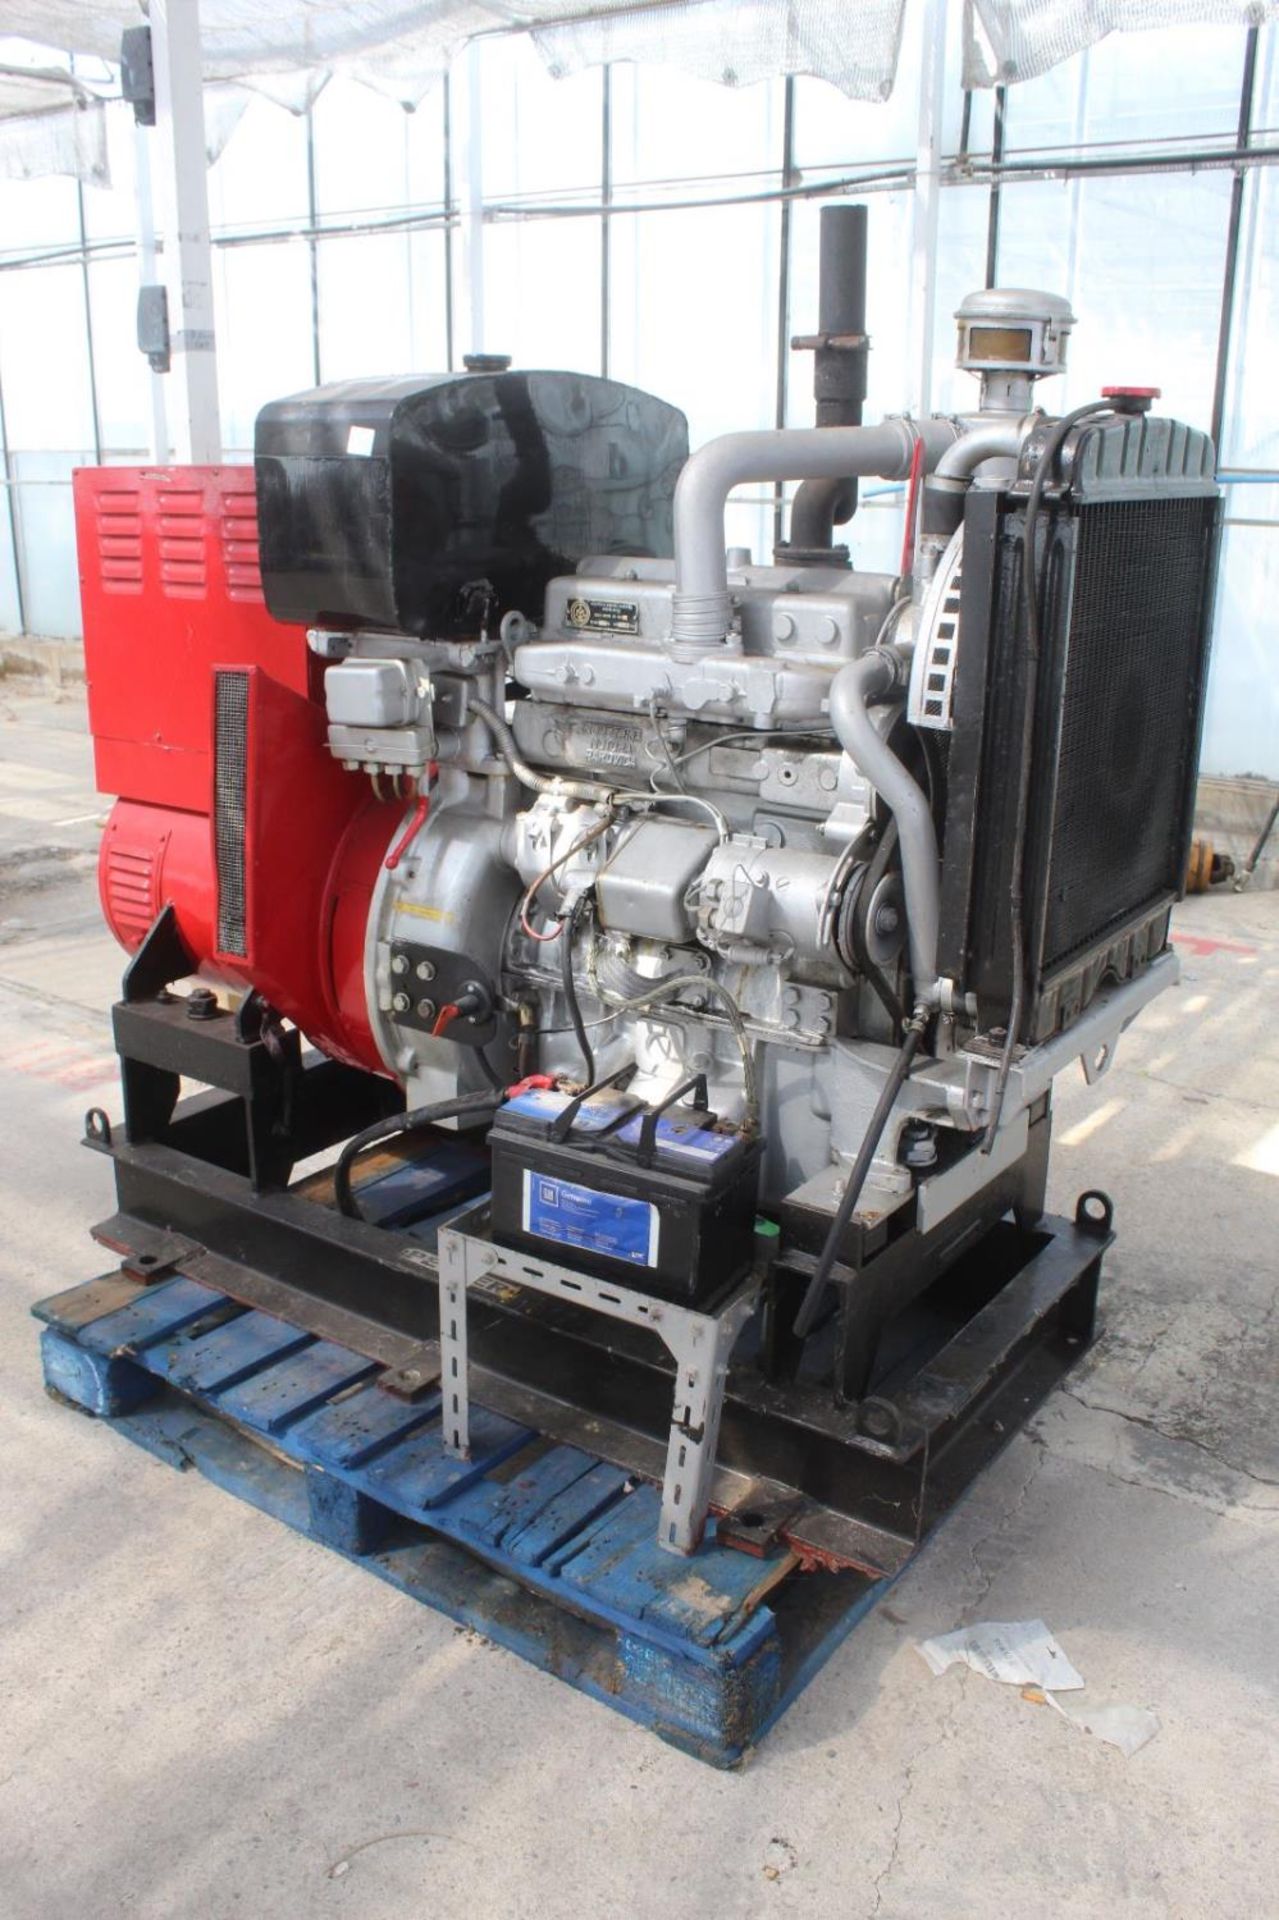 AN "ULJANIK" / PETTER 20KVA 3 PHASE MOBILE GENERATOR NO VAT FROM A SMALL DISPERSAL - Image 8 of 8